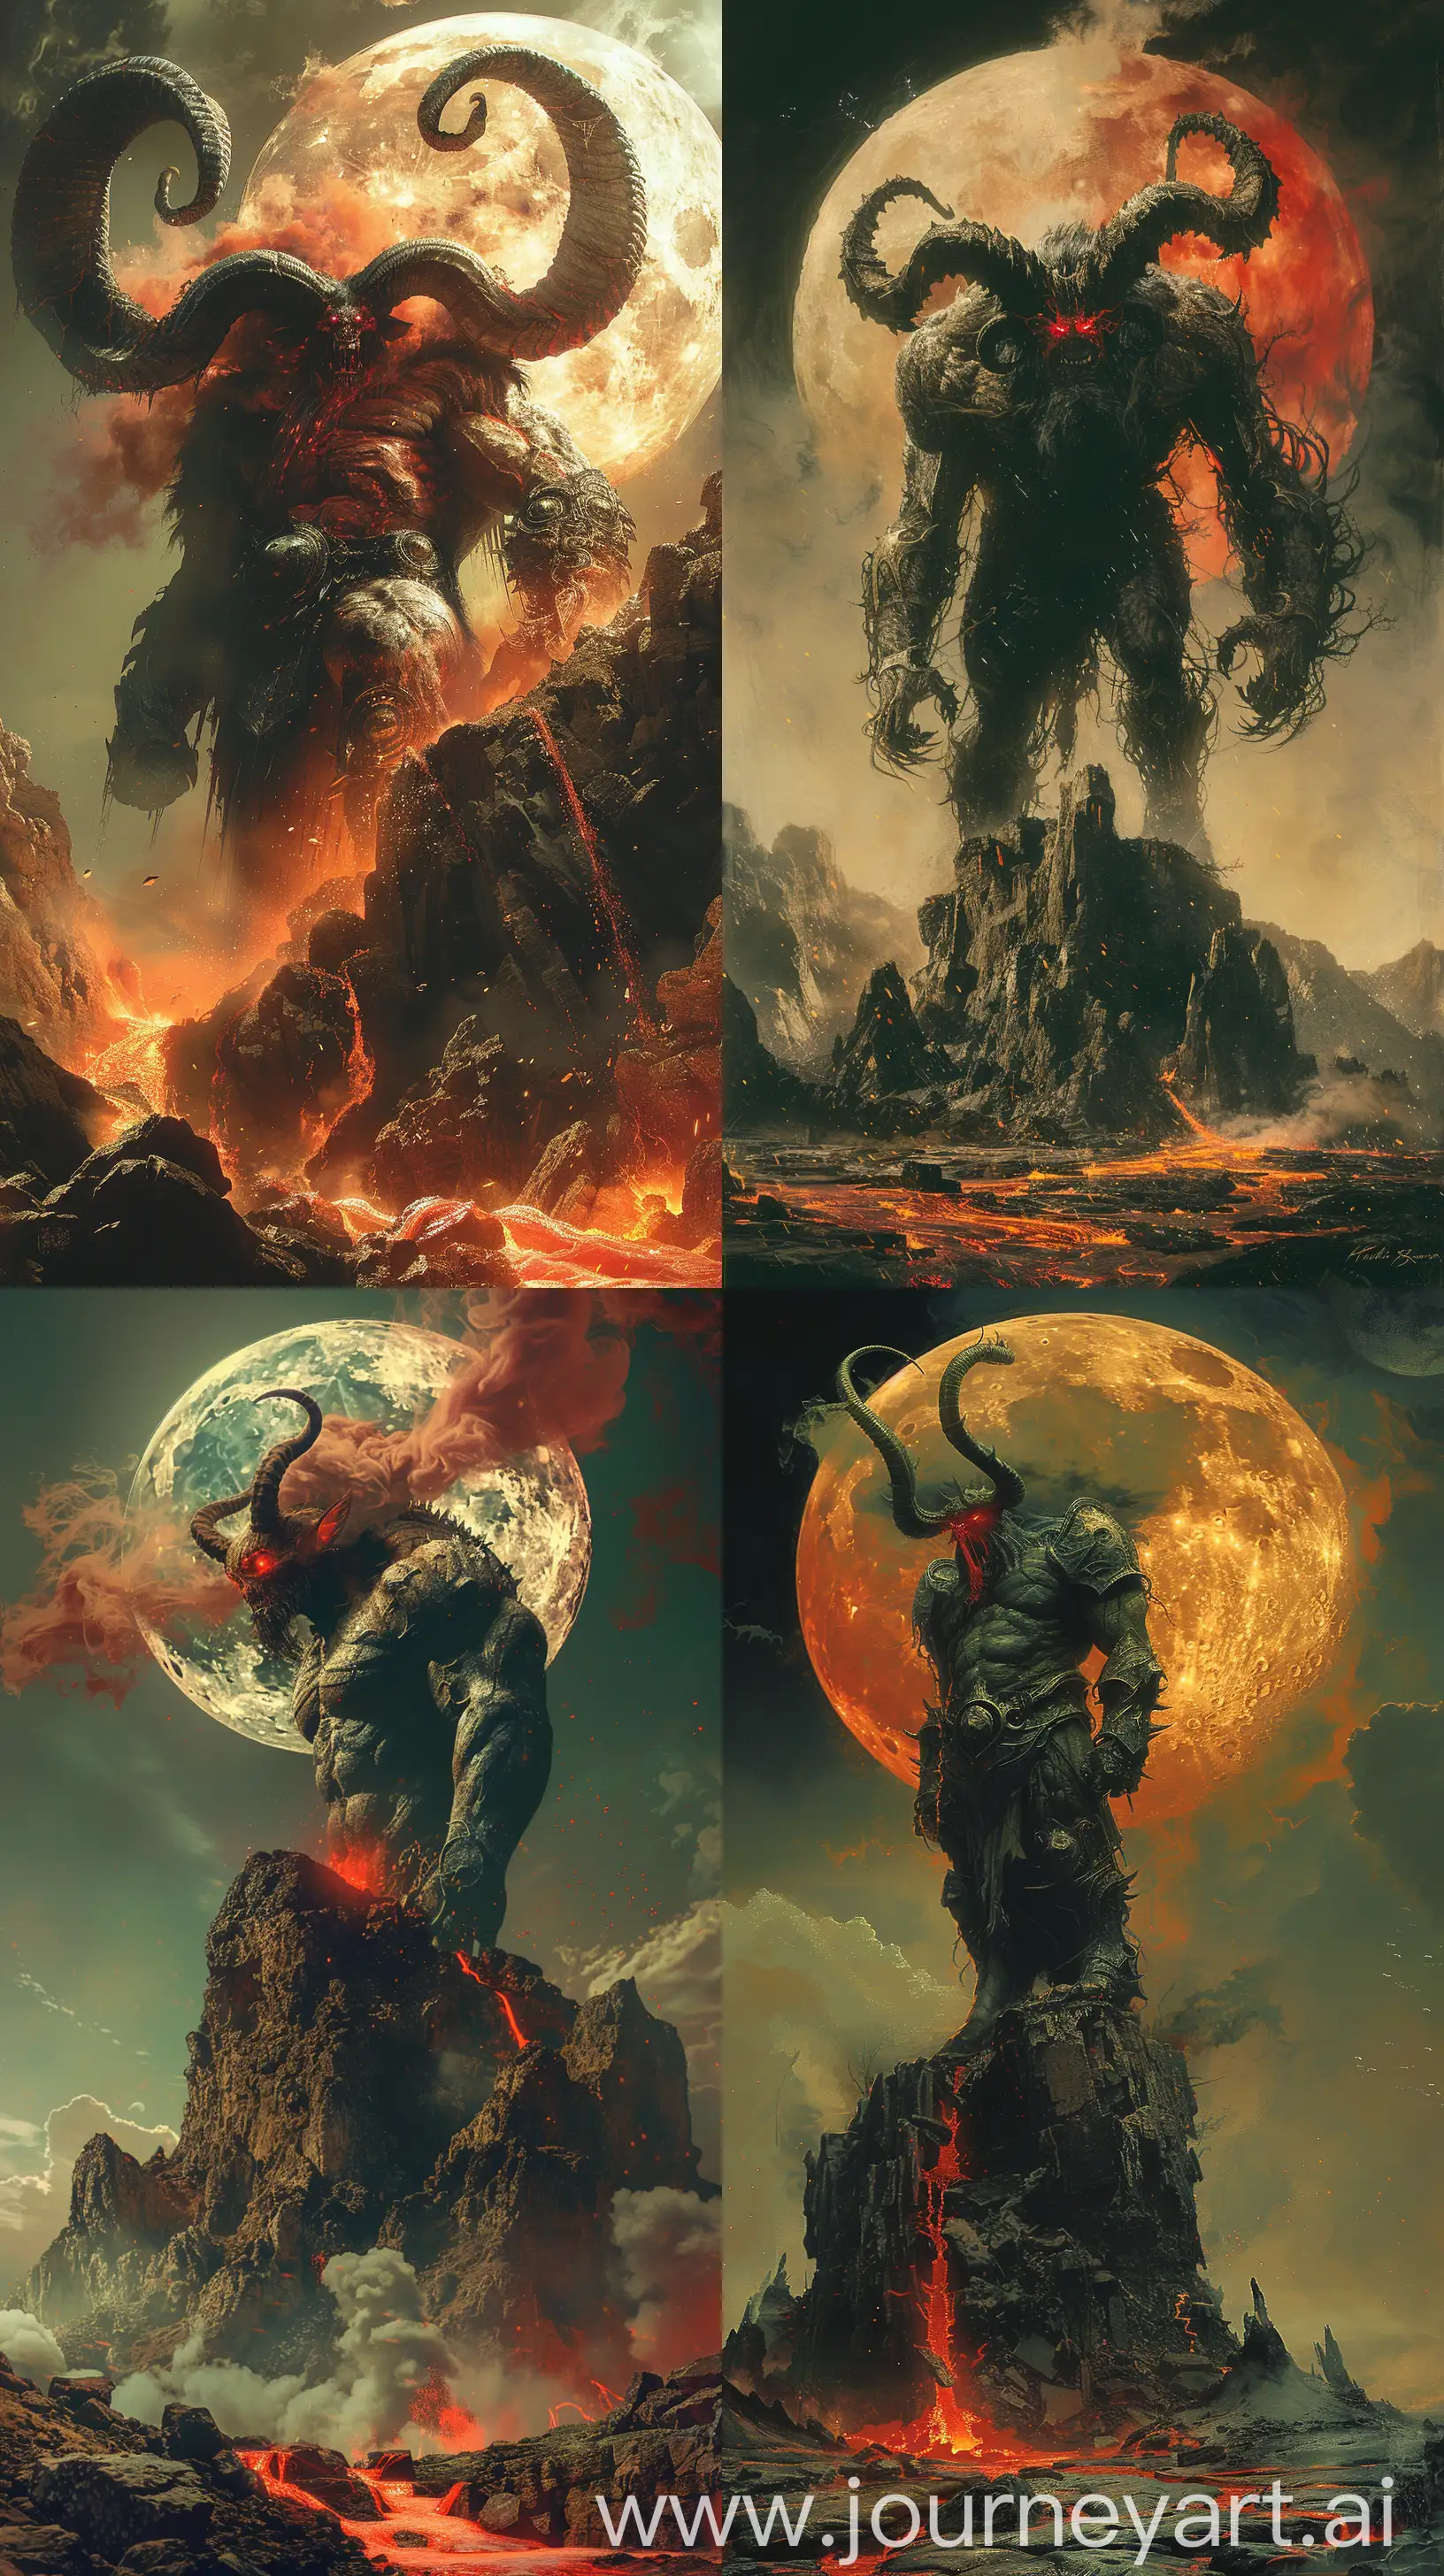  mythical demon lord, hulking figure with iron-clad muscles, horns curling like smoke, eyes glowing fiery red, standing atop a desolate mountain under a blood moon, lava flowing around him, Baroque horror style, high detail, dramatic dark lighting, sense of immense power and terror --ar 9:16 --s 750 --v 6 --c 20